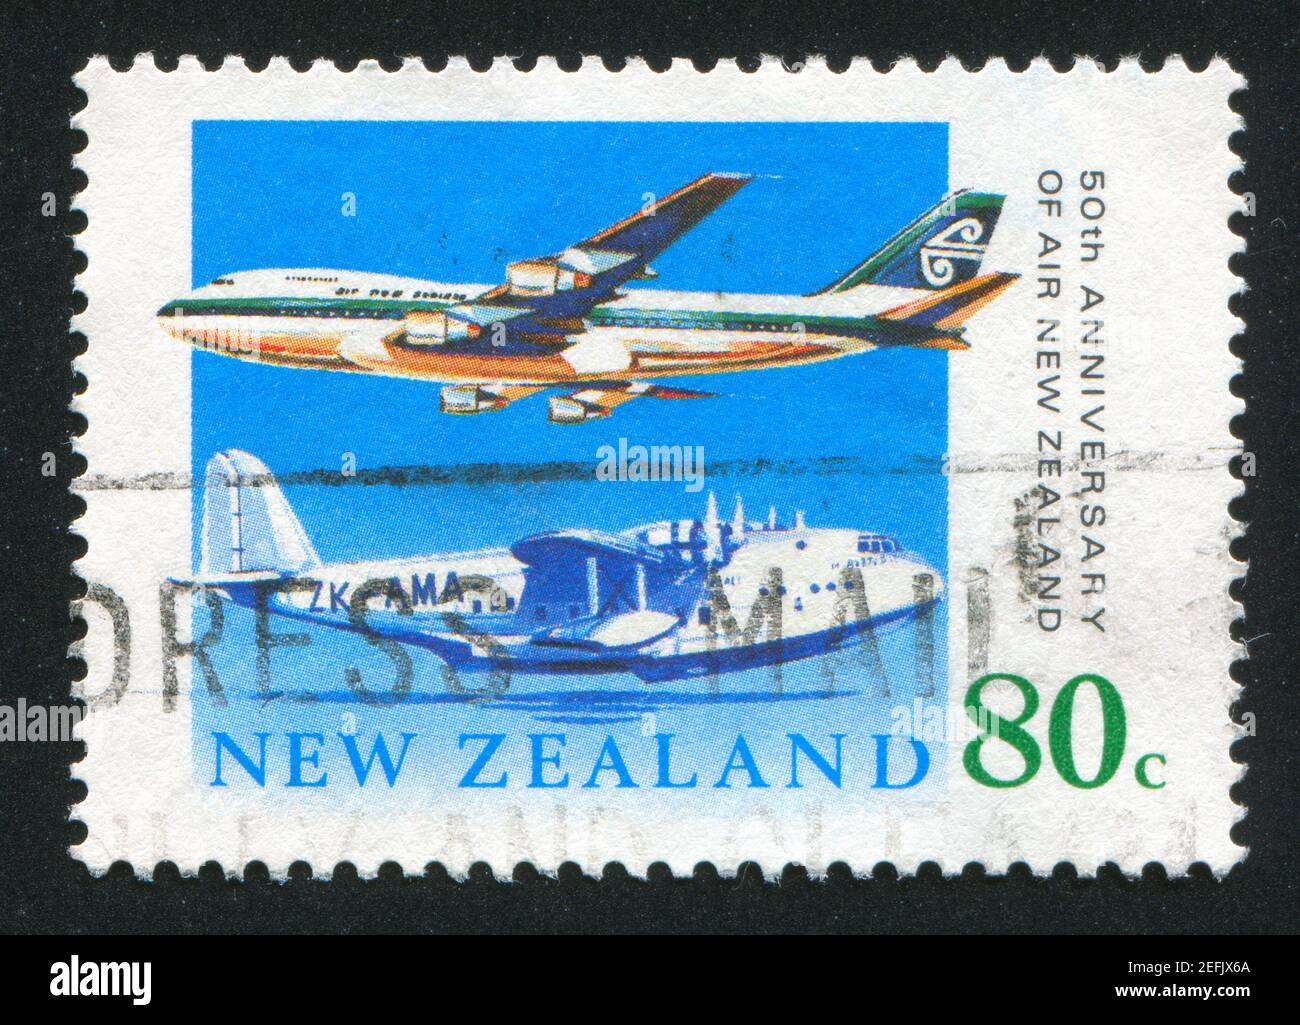 NEW ZEALAND - CIRCA 1990: stamp printed by New Zealand, shows Short S30 Empire Class Flying Boat, Boeing 747-200, circa 1990 Stock Photo